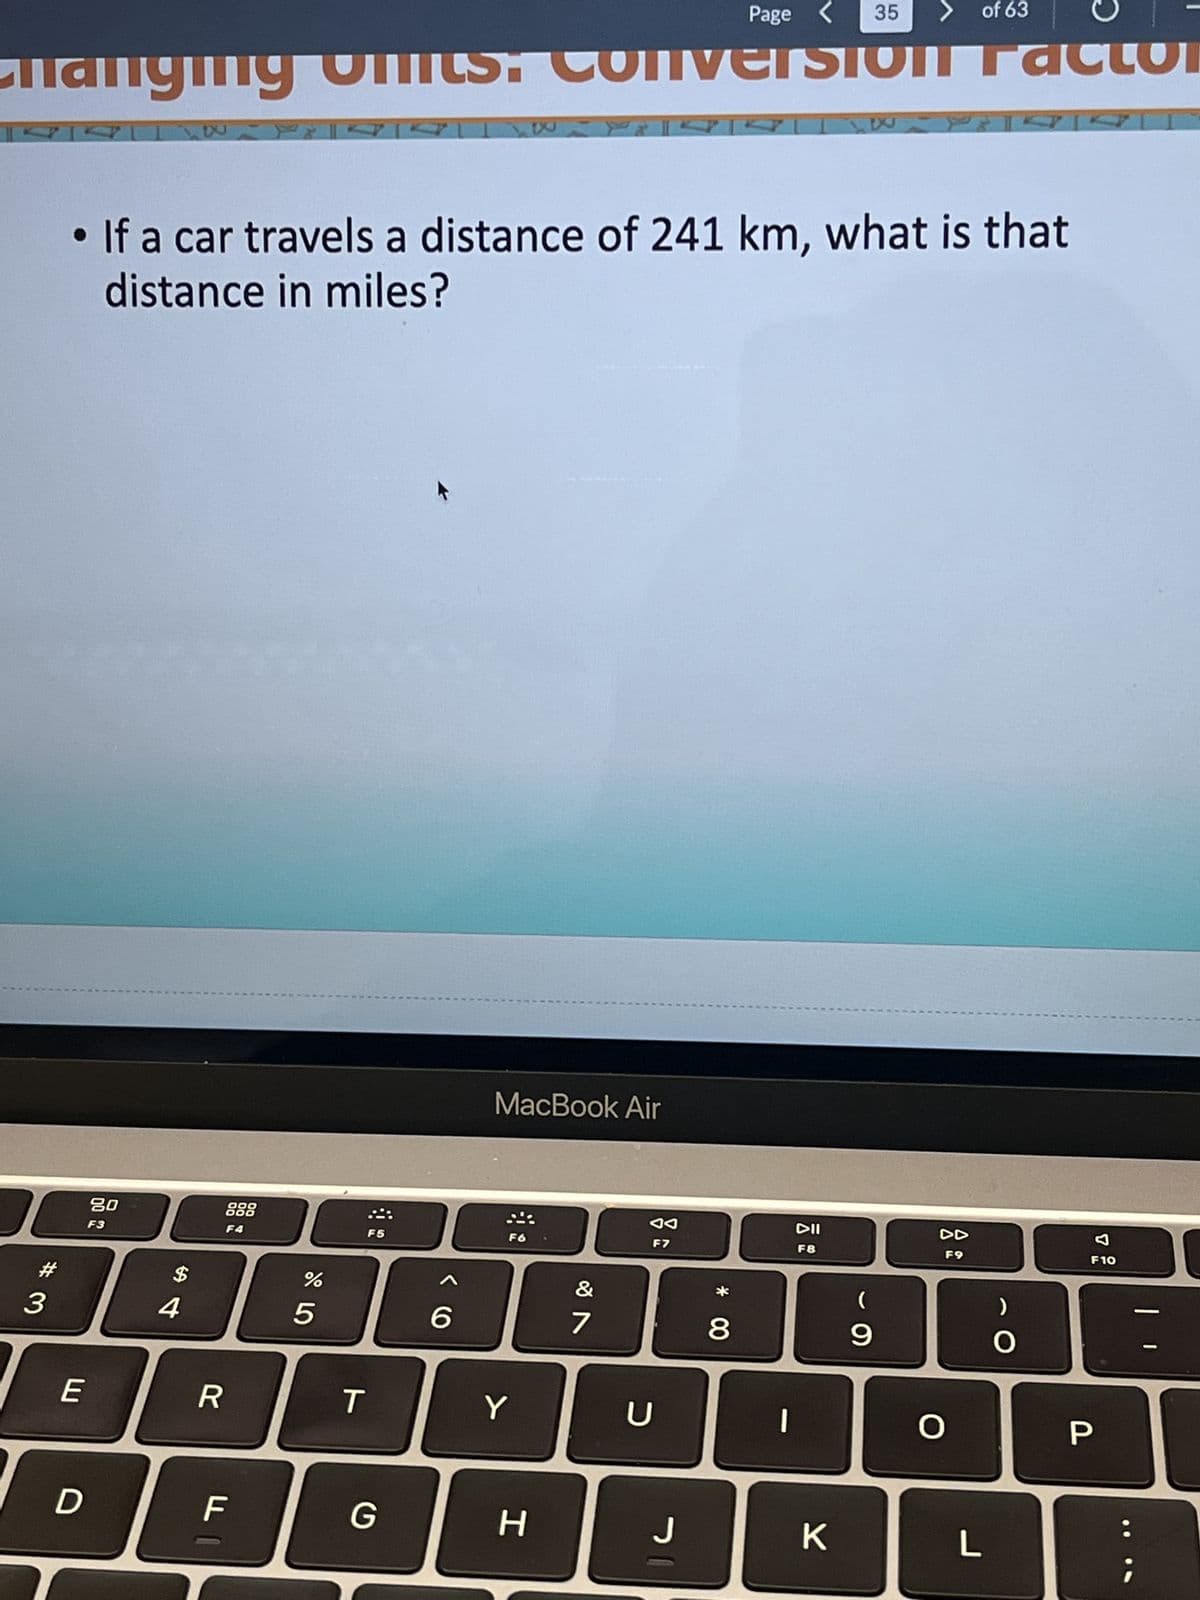 #
Page
nanging units: Conversion Factor
3
E
D
20
F3
$
If a car travels a distance of 241 km, what is that
distance in miles?
4
888
R
F
%
5
T
F5
G
6
MacBook Air
F6
&
Y
H
&
7
◄◄
F7
U
J
* 00
8
|
DII
F8
35
K
> of 63
(
9
DD
F9
O
L
)
O
F10
P
;